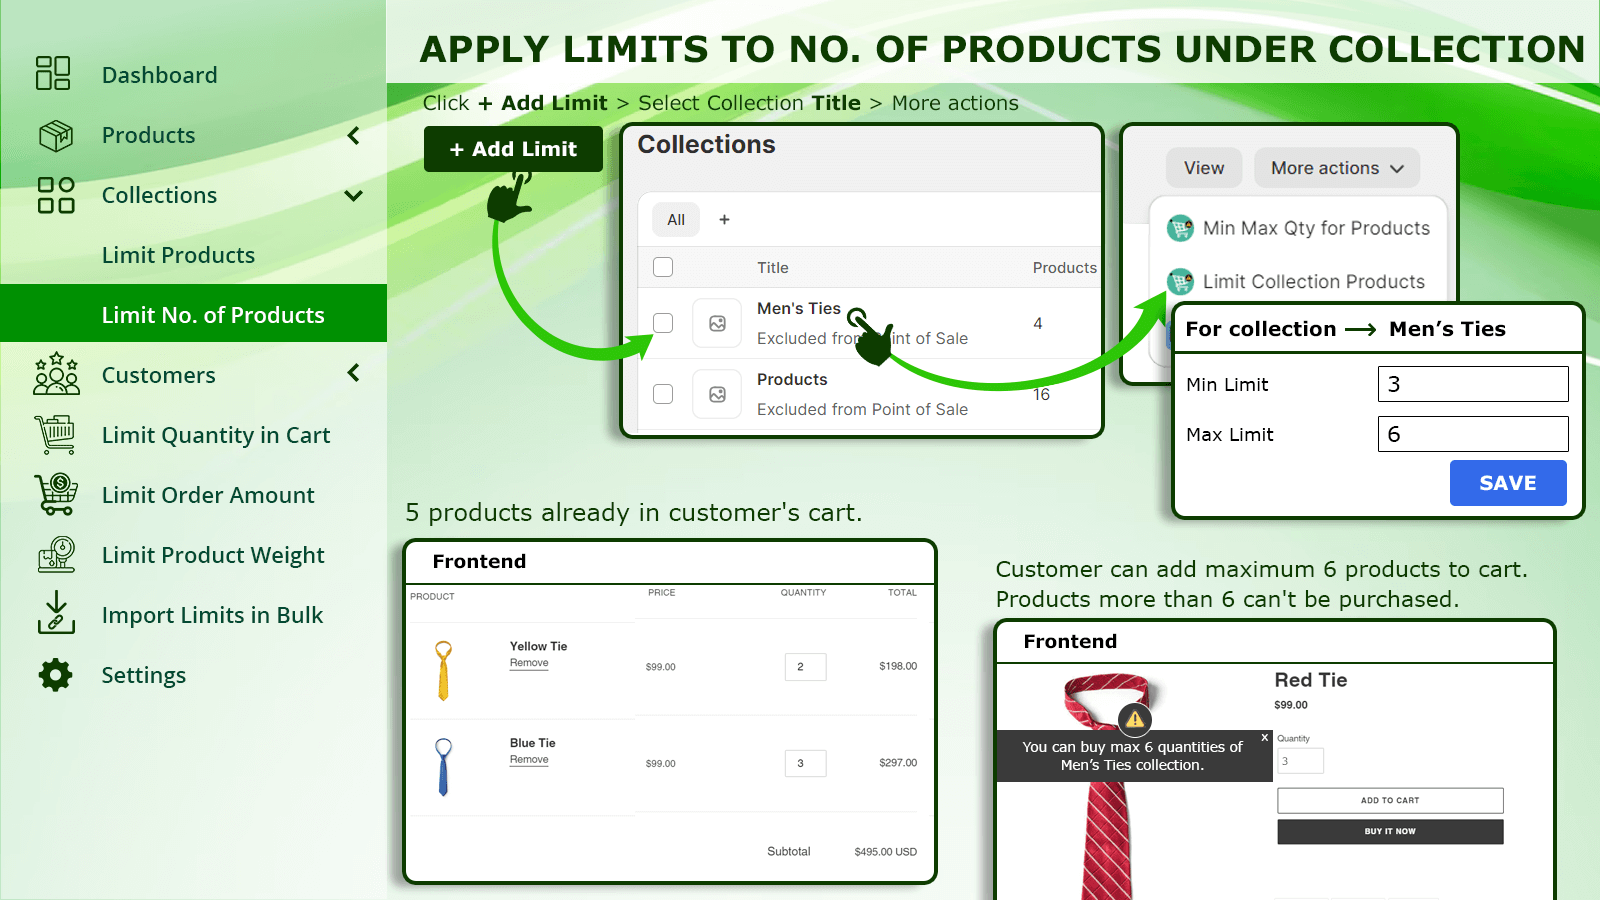 Apply limits to number of products under collection